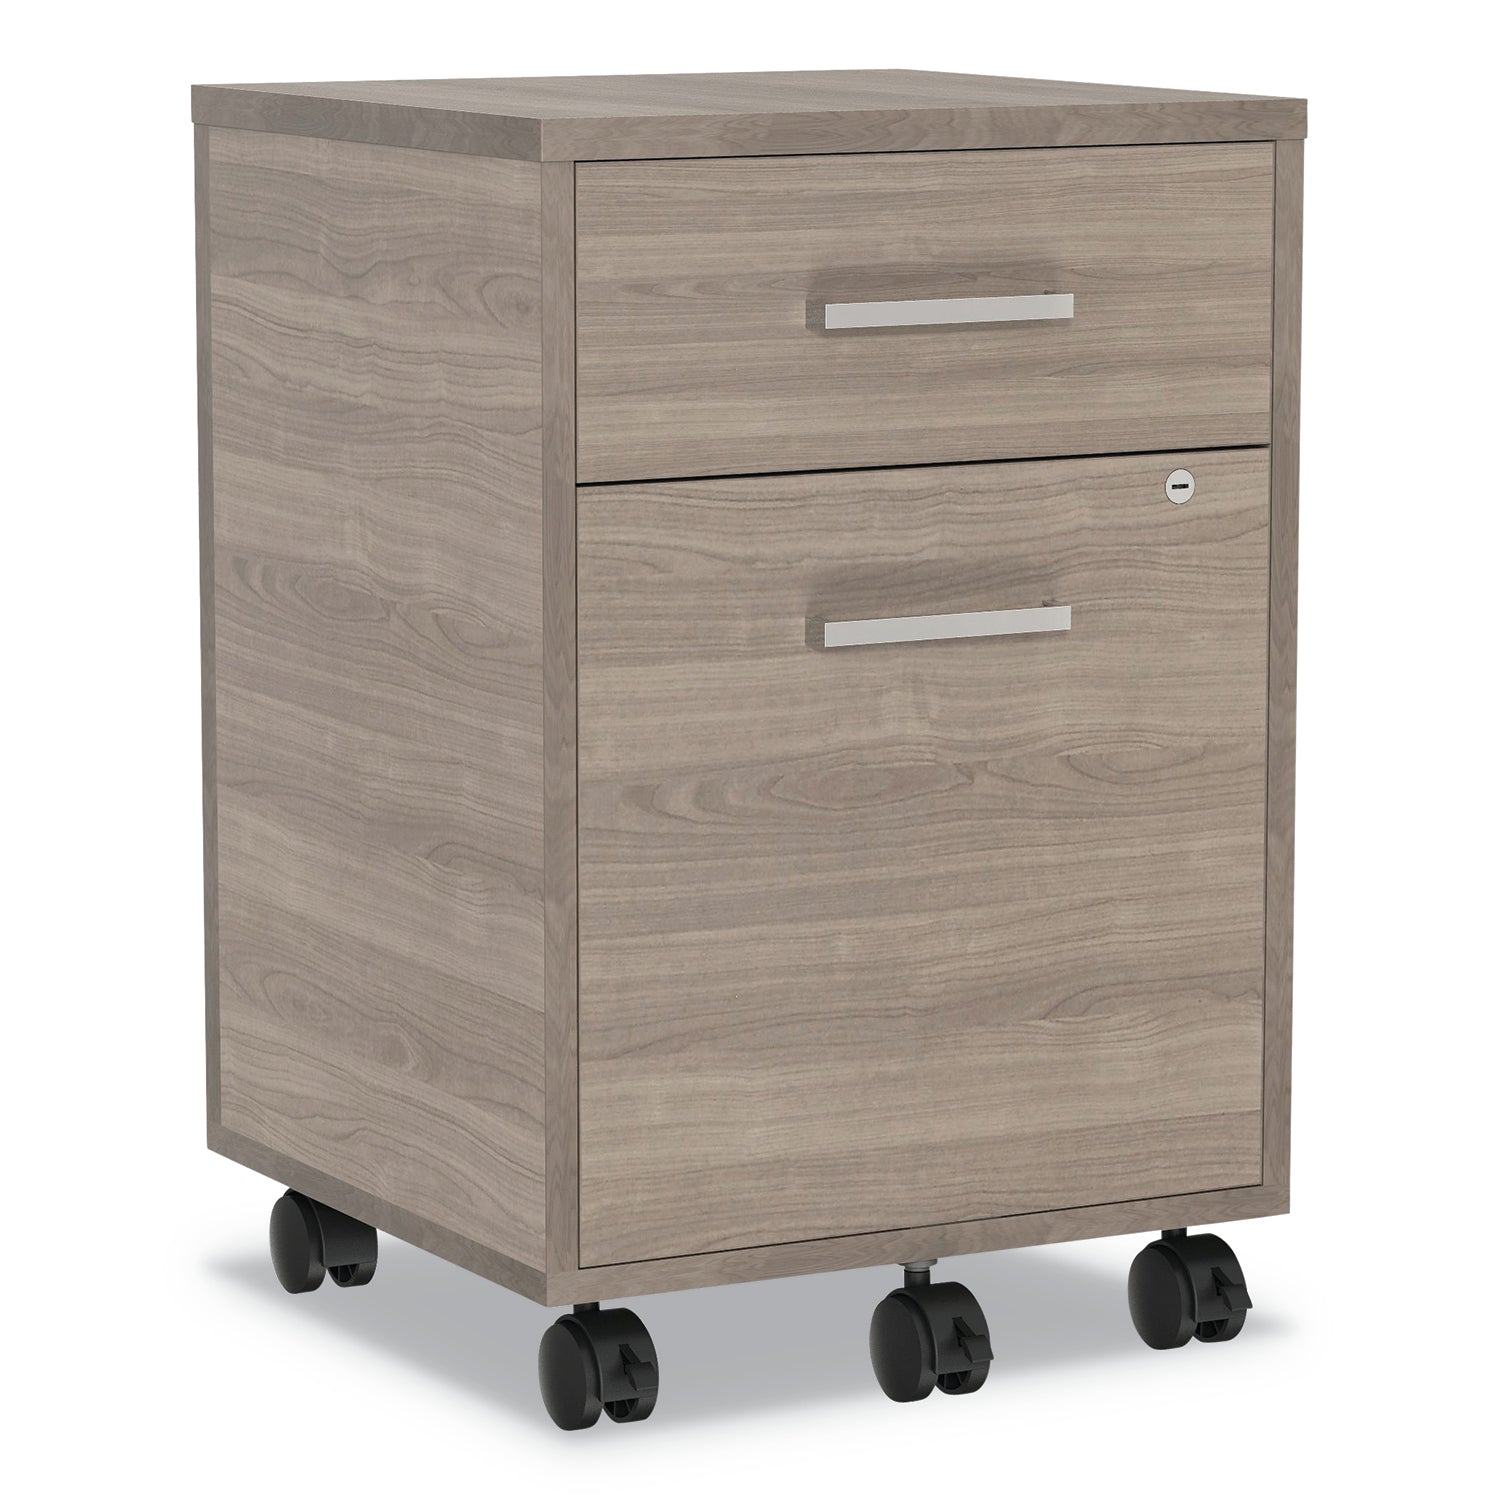 urban-mobile-file-pedestal-left-or-right-2-drawers-box-file-legal-a4-natural-walnut-16-x-1525-x-2375_litur610nw - 2